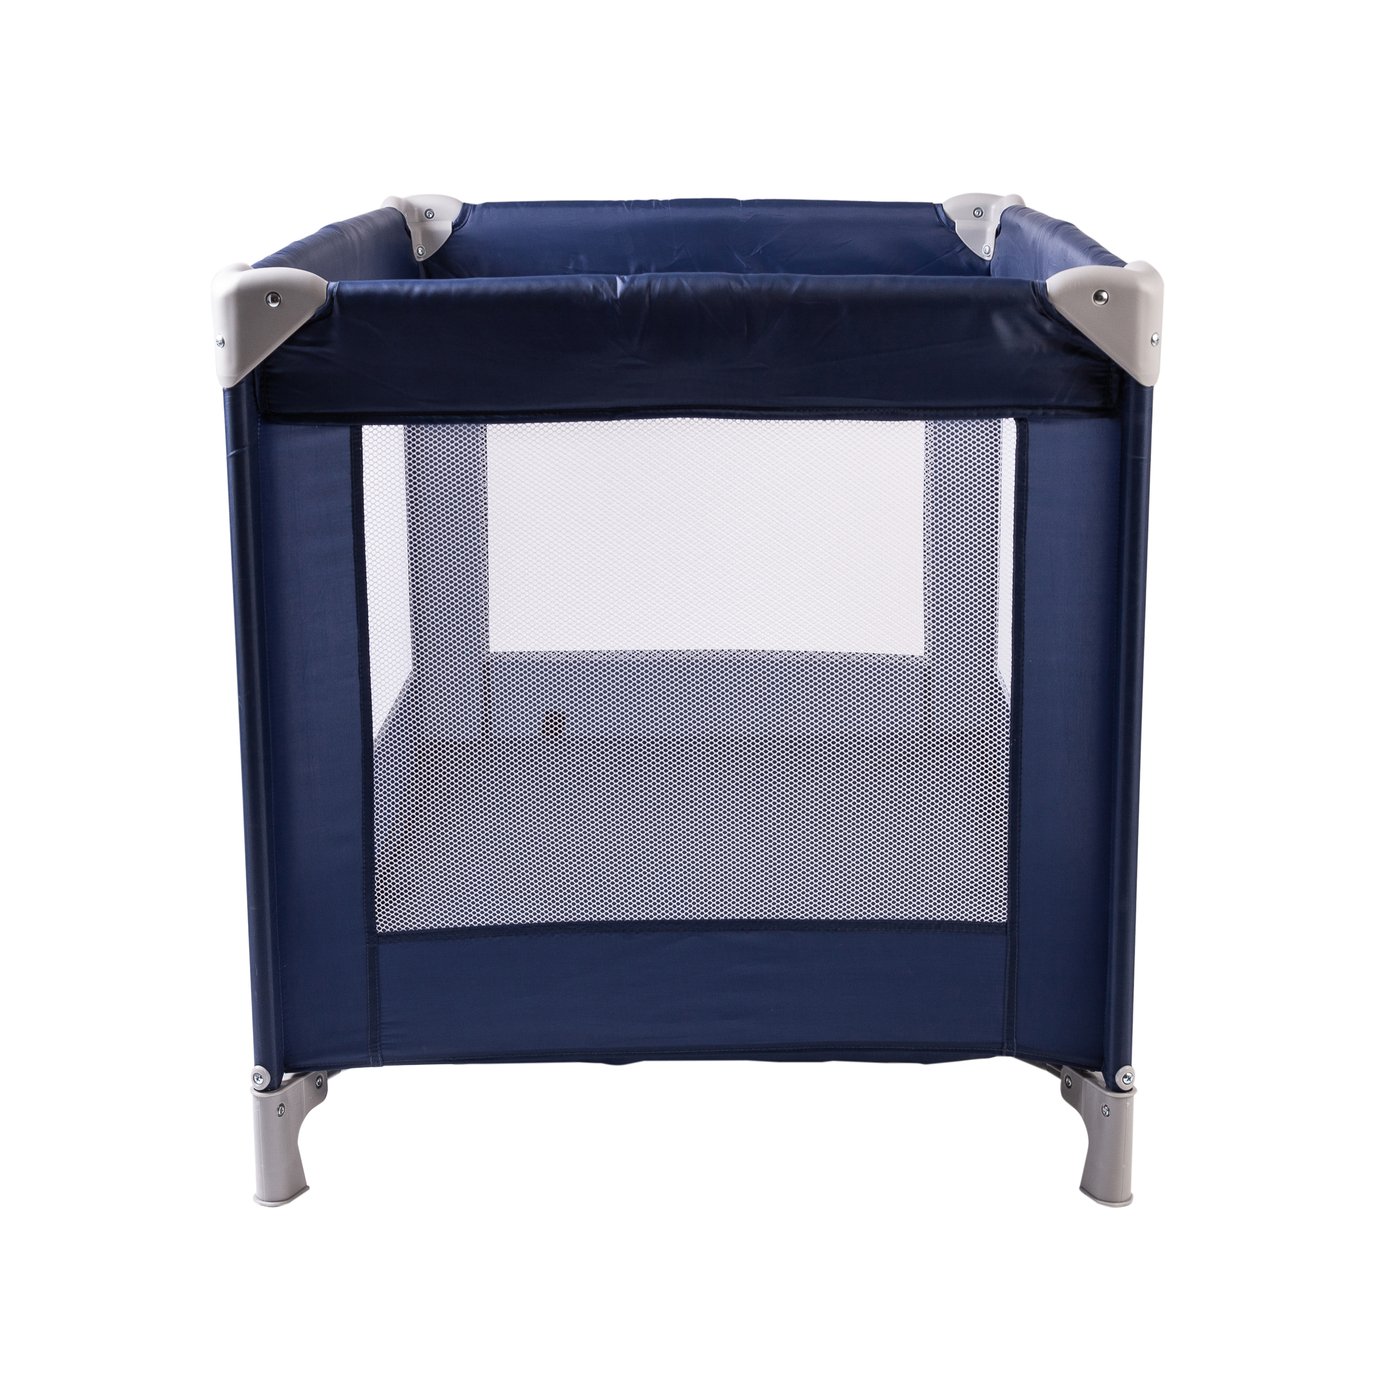 travel cot buy now pay later